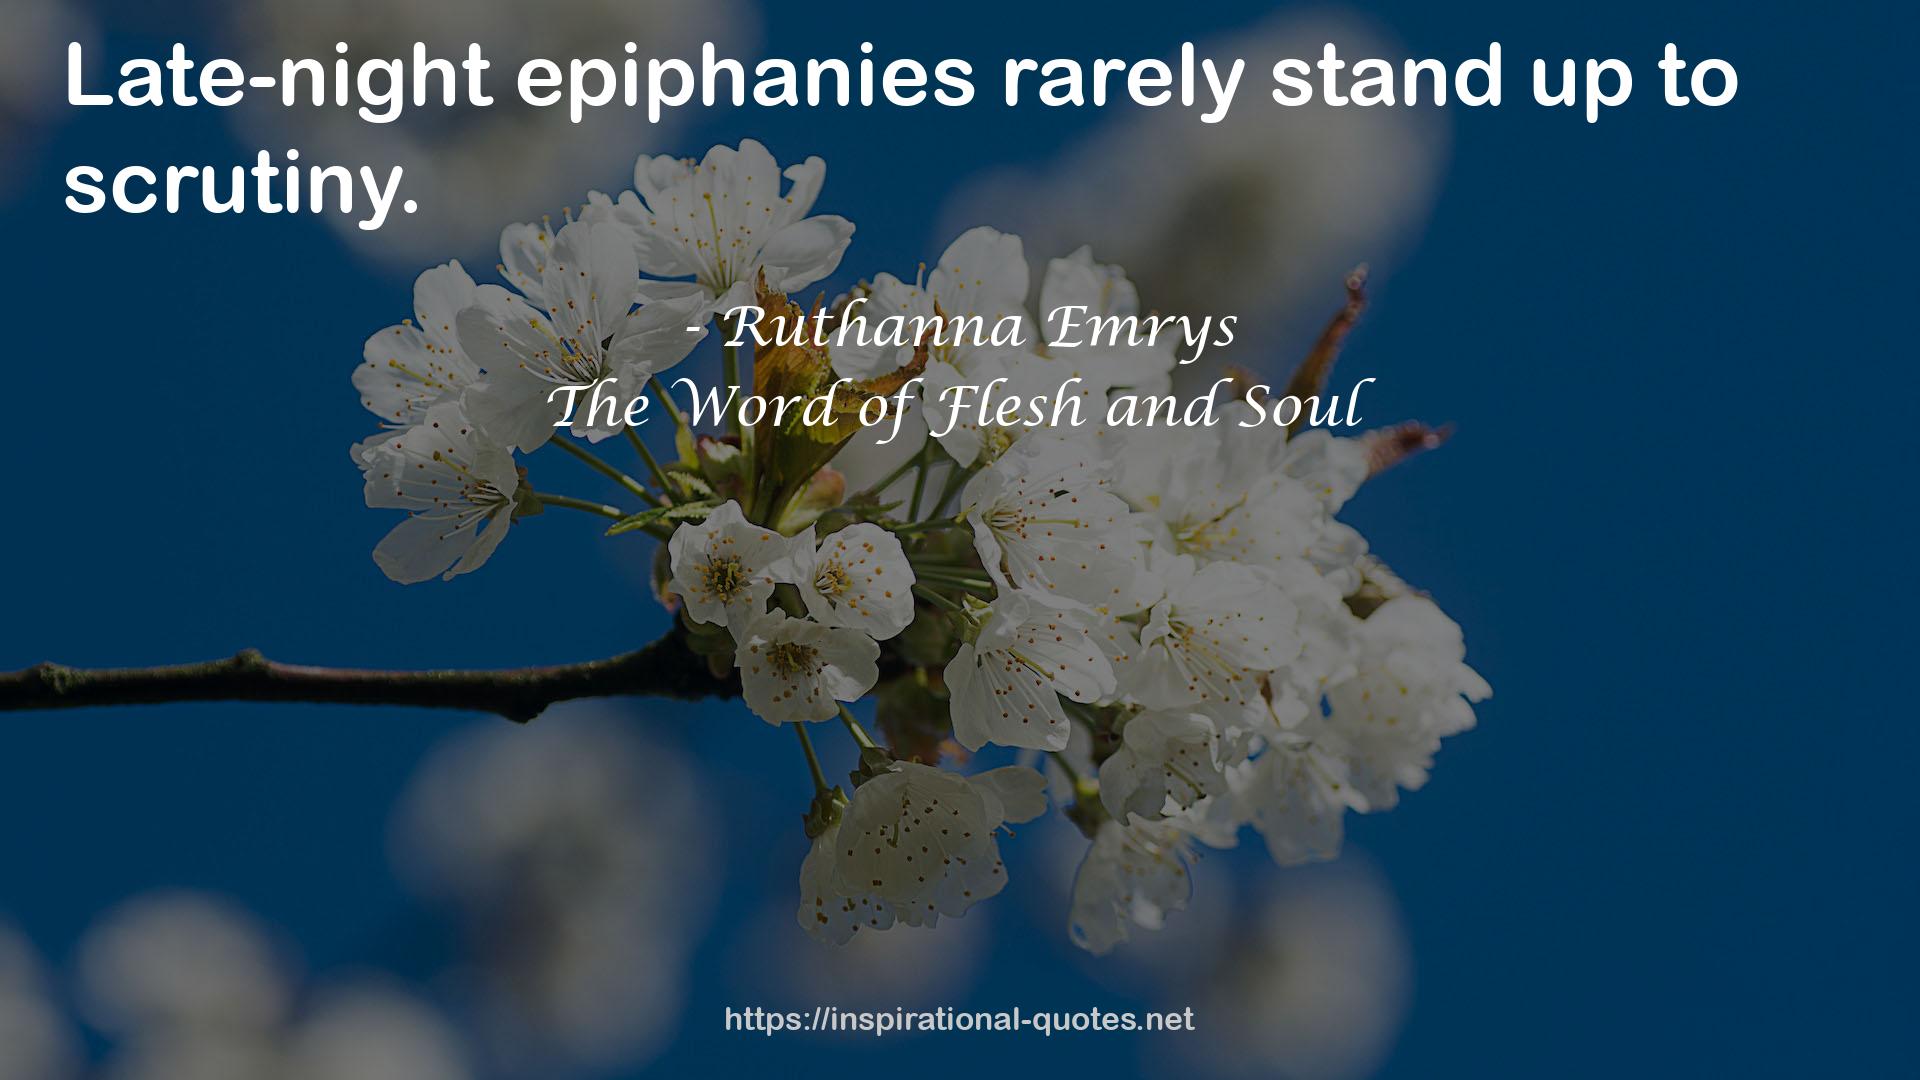 The Word of Flesh and Soul QUOTES